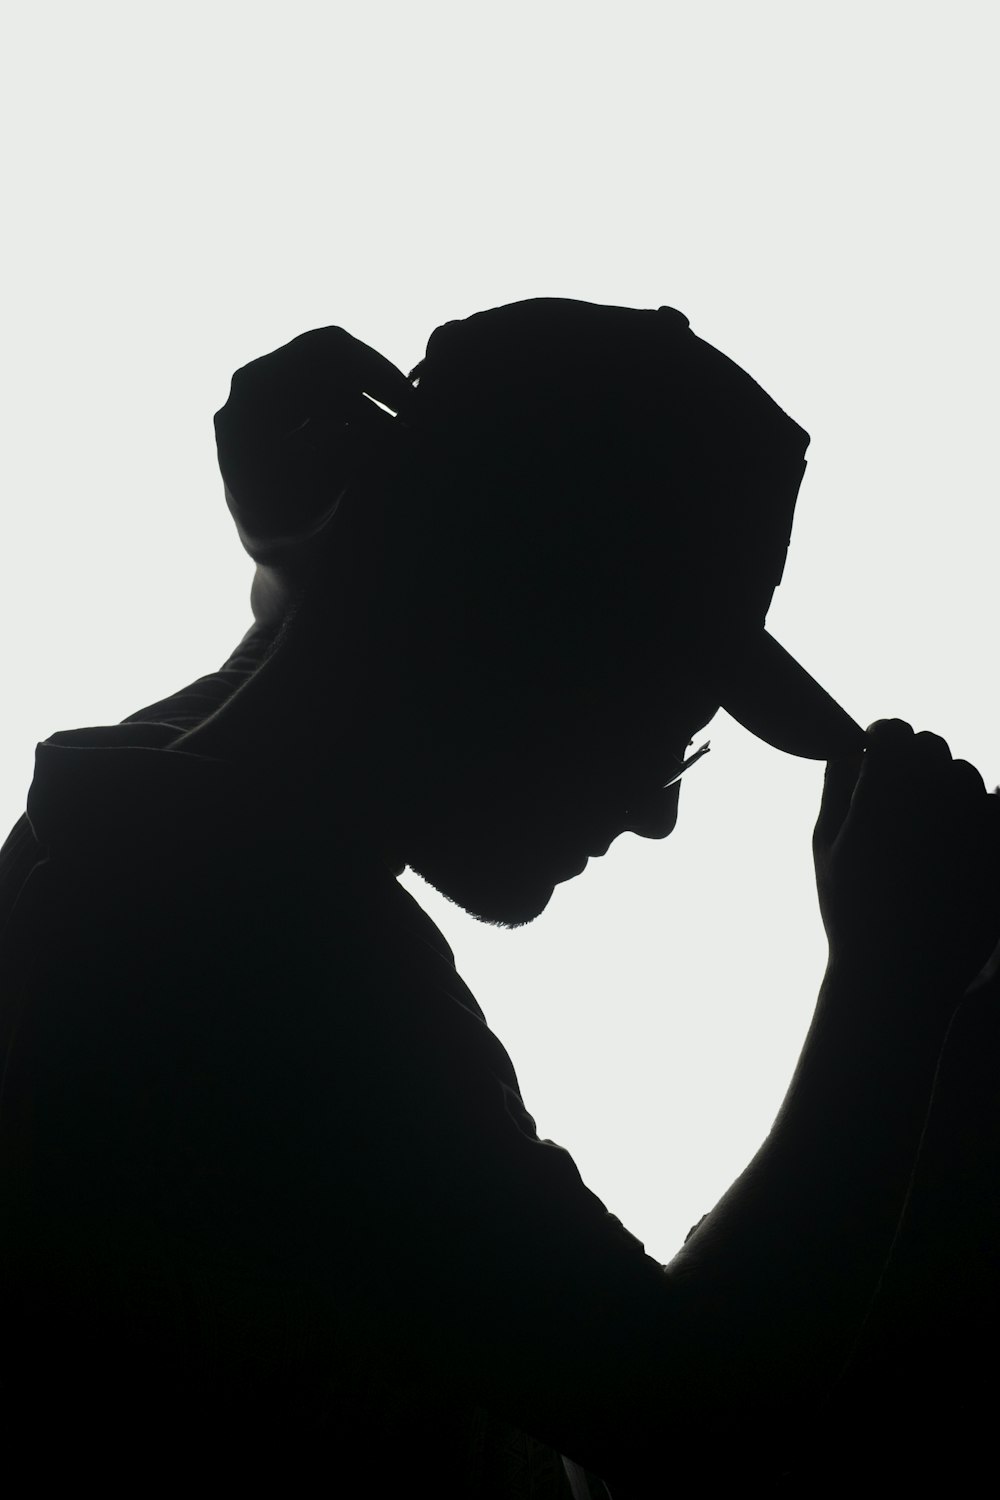 a silhouette of a person holding a cell phone to their ear